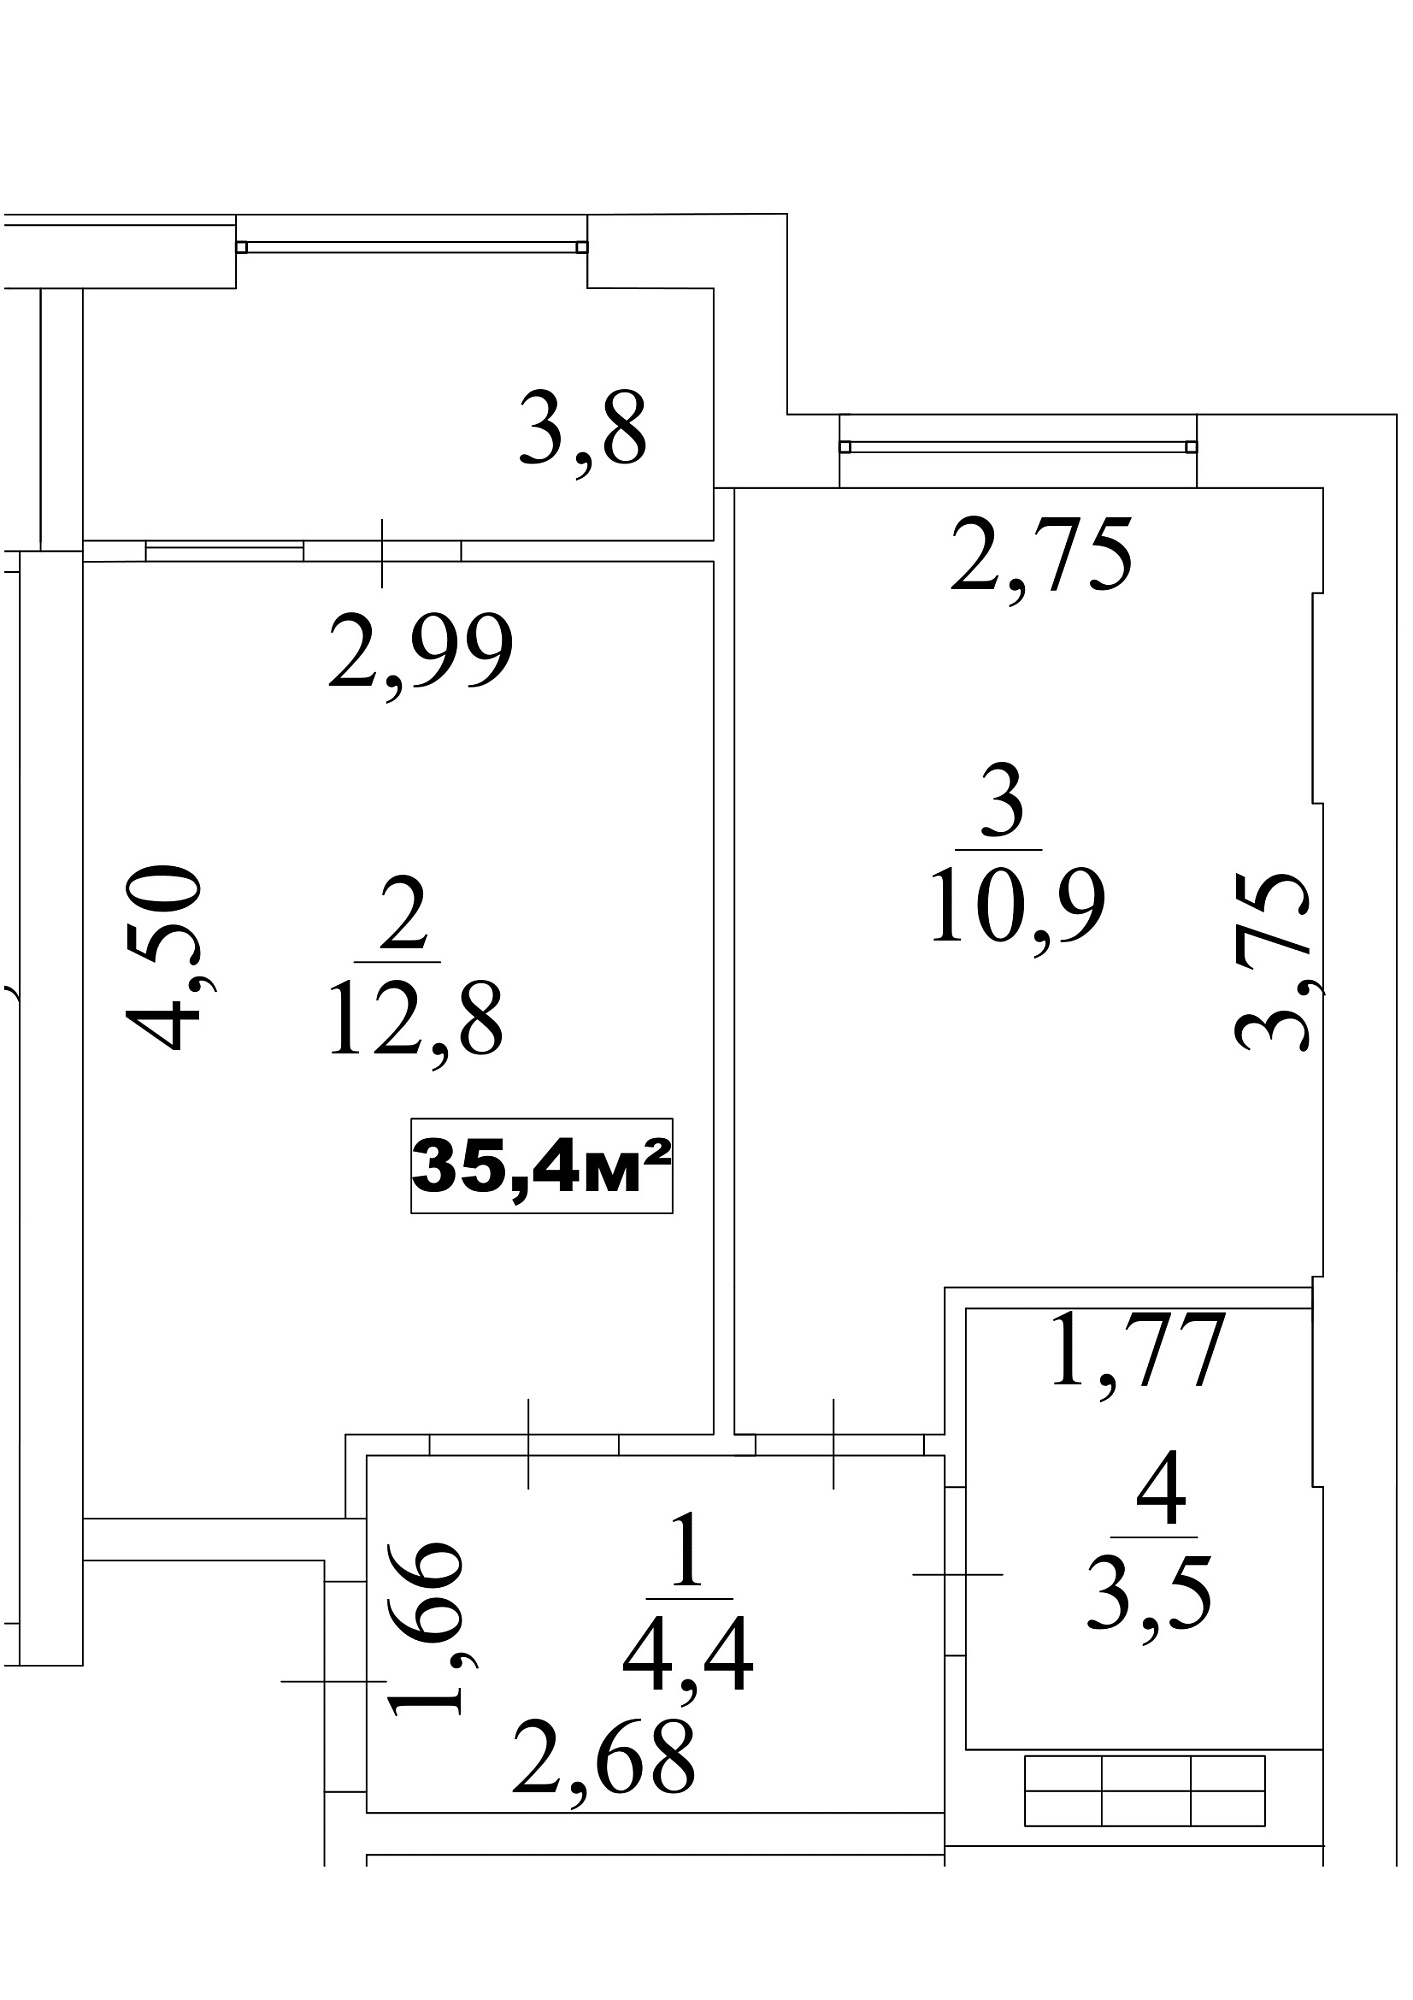 Planning 1-rm flats area 35.4m2, AB-10-01/0007б.